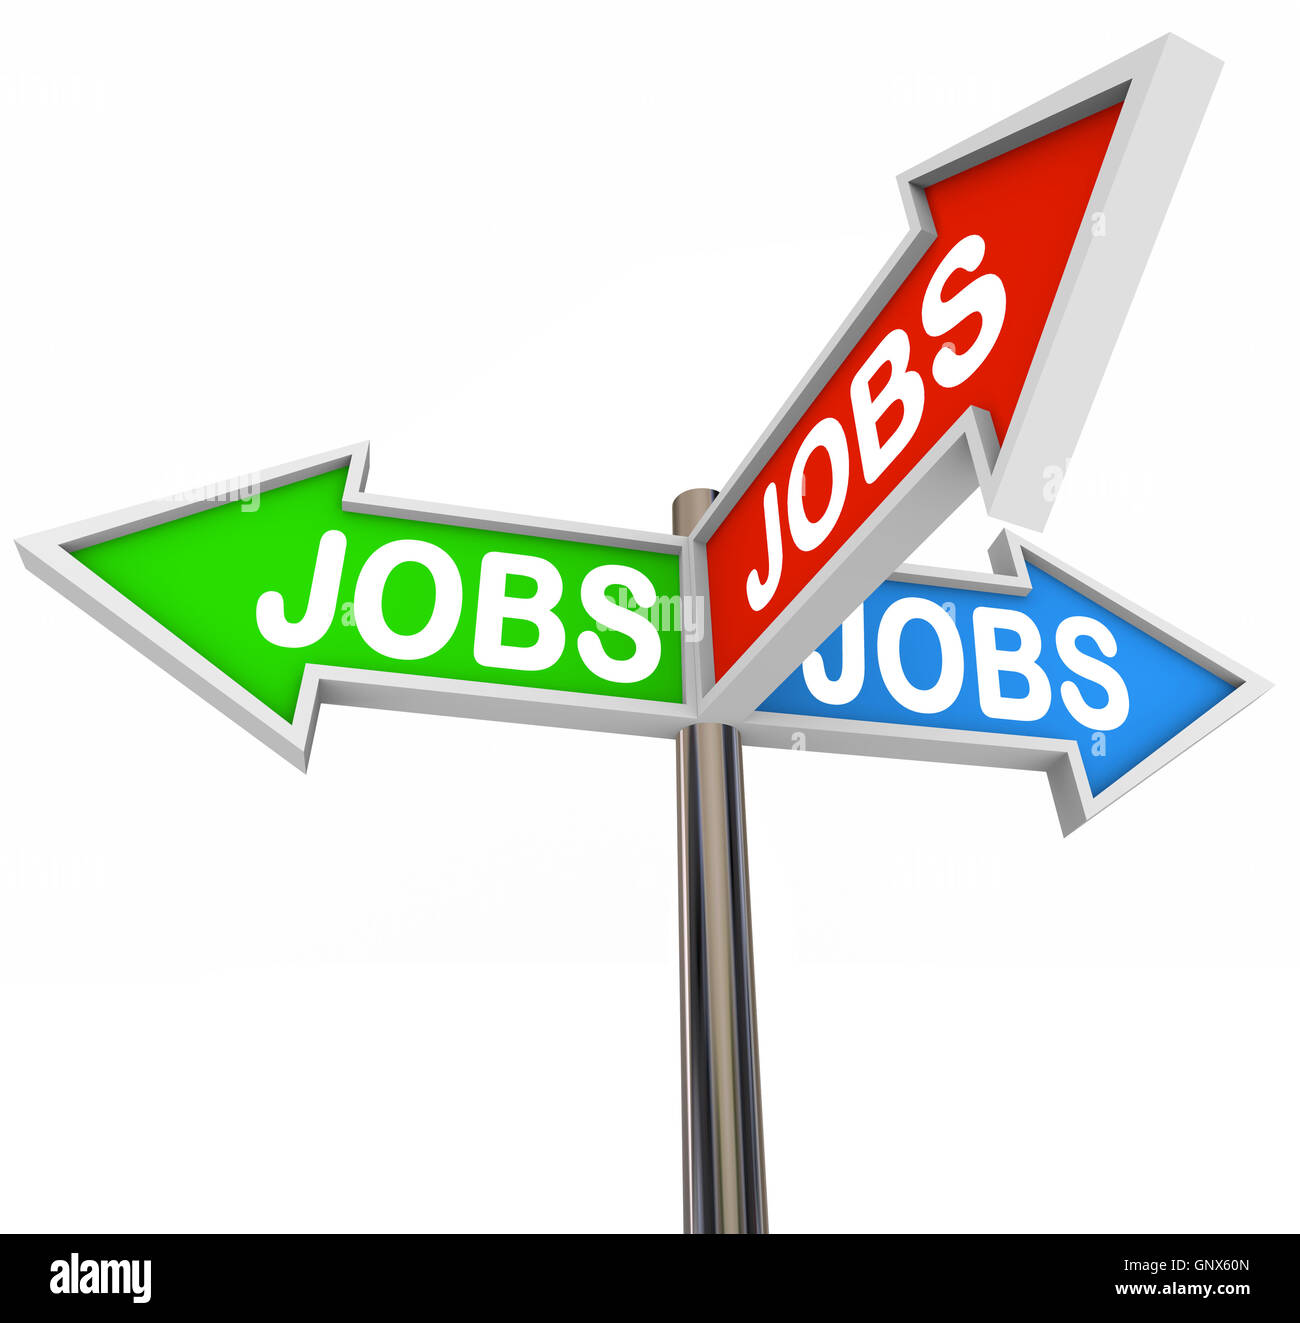 Jobs Street Signs Pointing Way to New Job Career Stock Photo